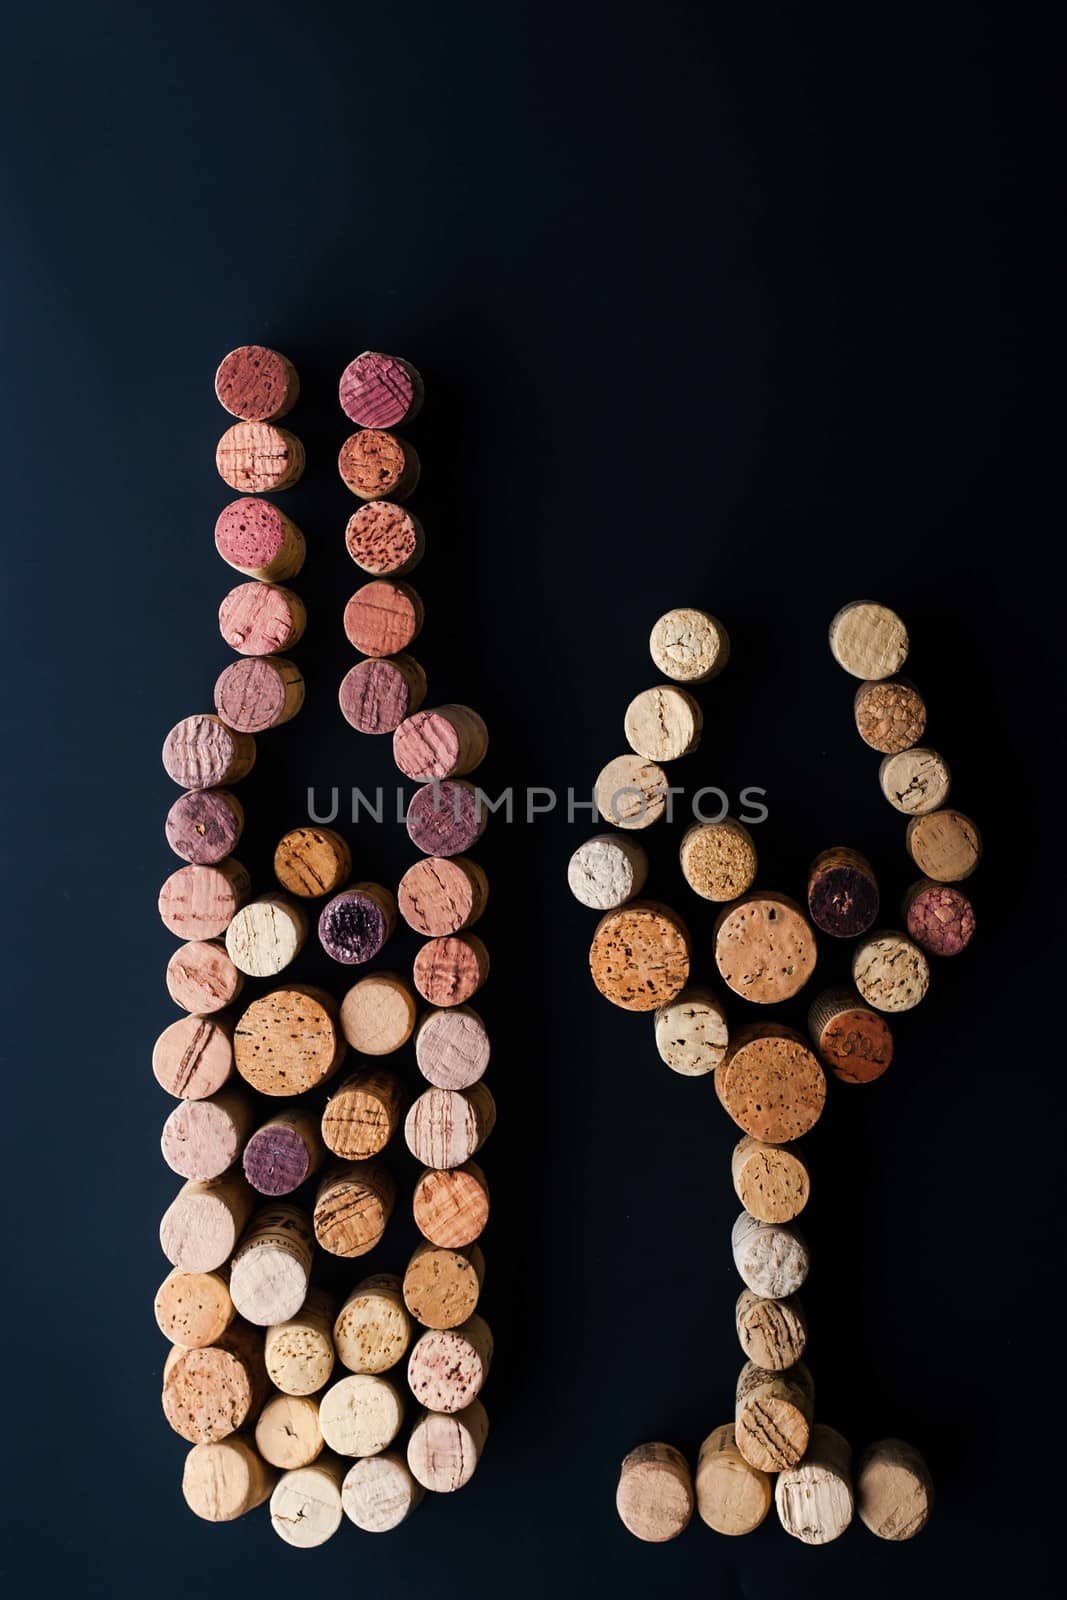 Wine bottle and glass made by corks vertical